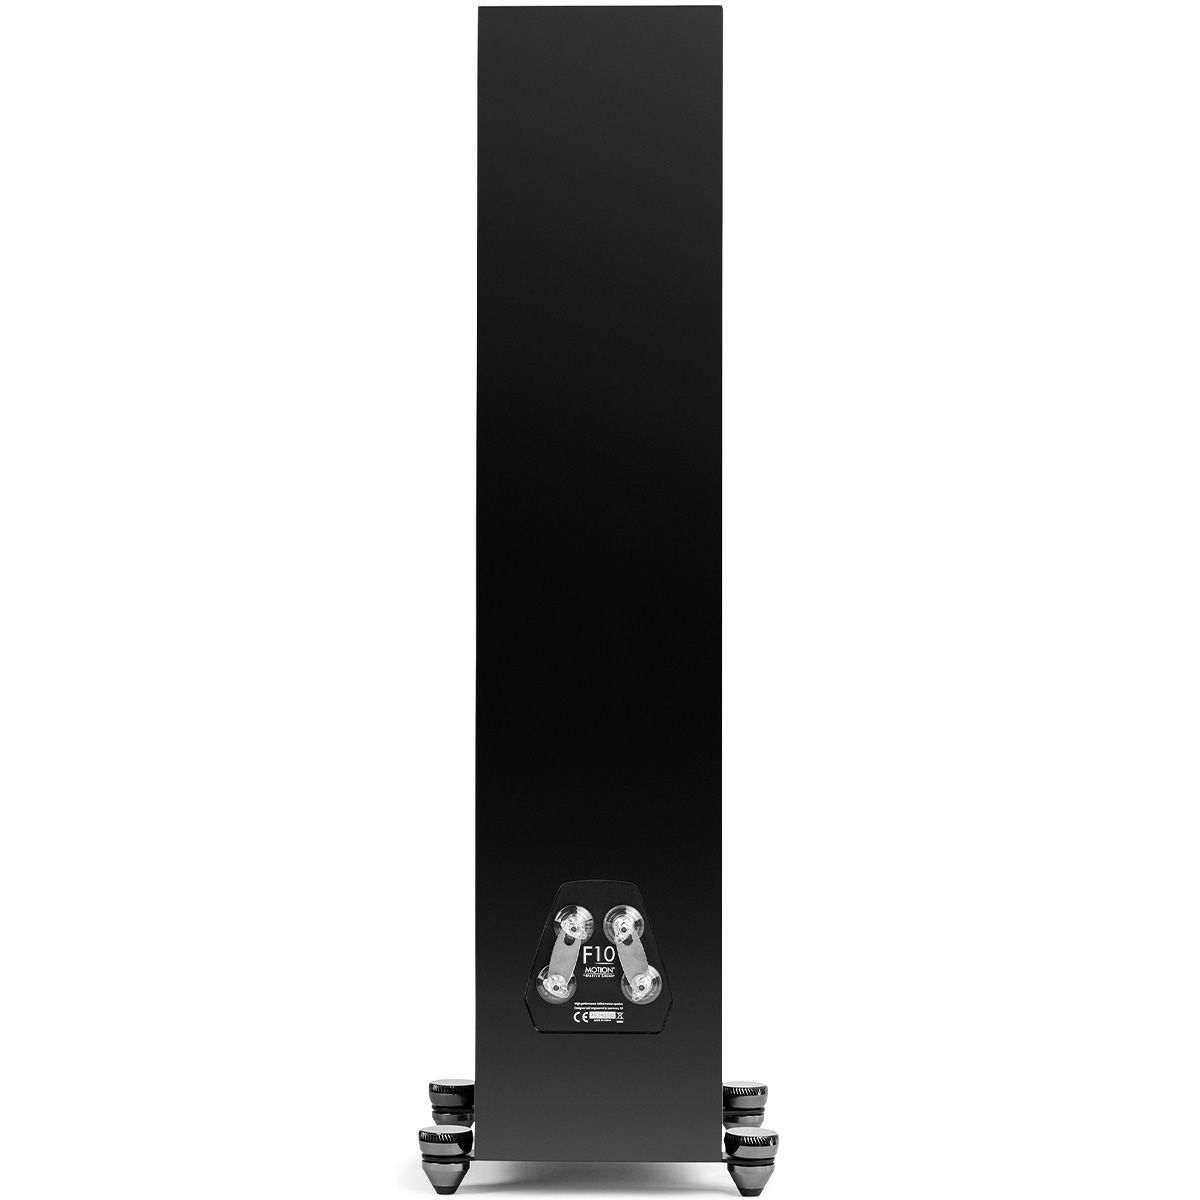 MartinLogan Motion XT F10  Floorstanding Speaker in black, rear view with grilles on white background